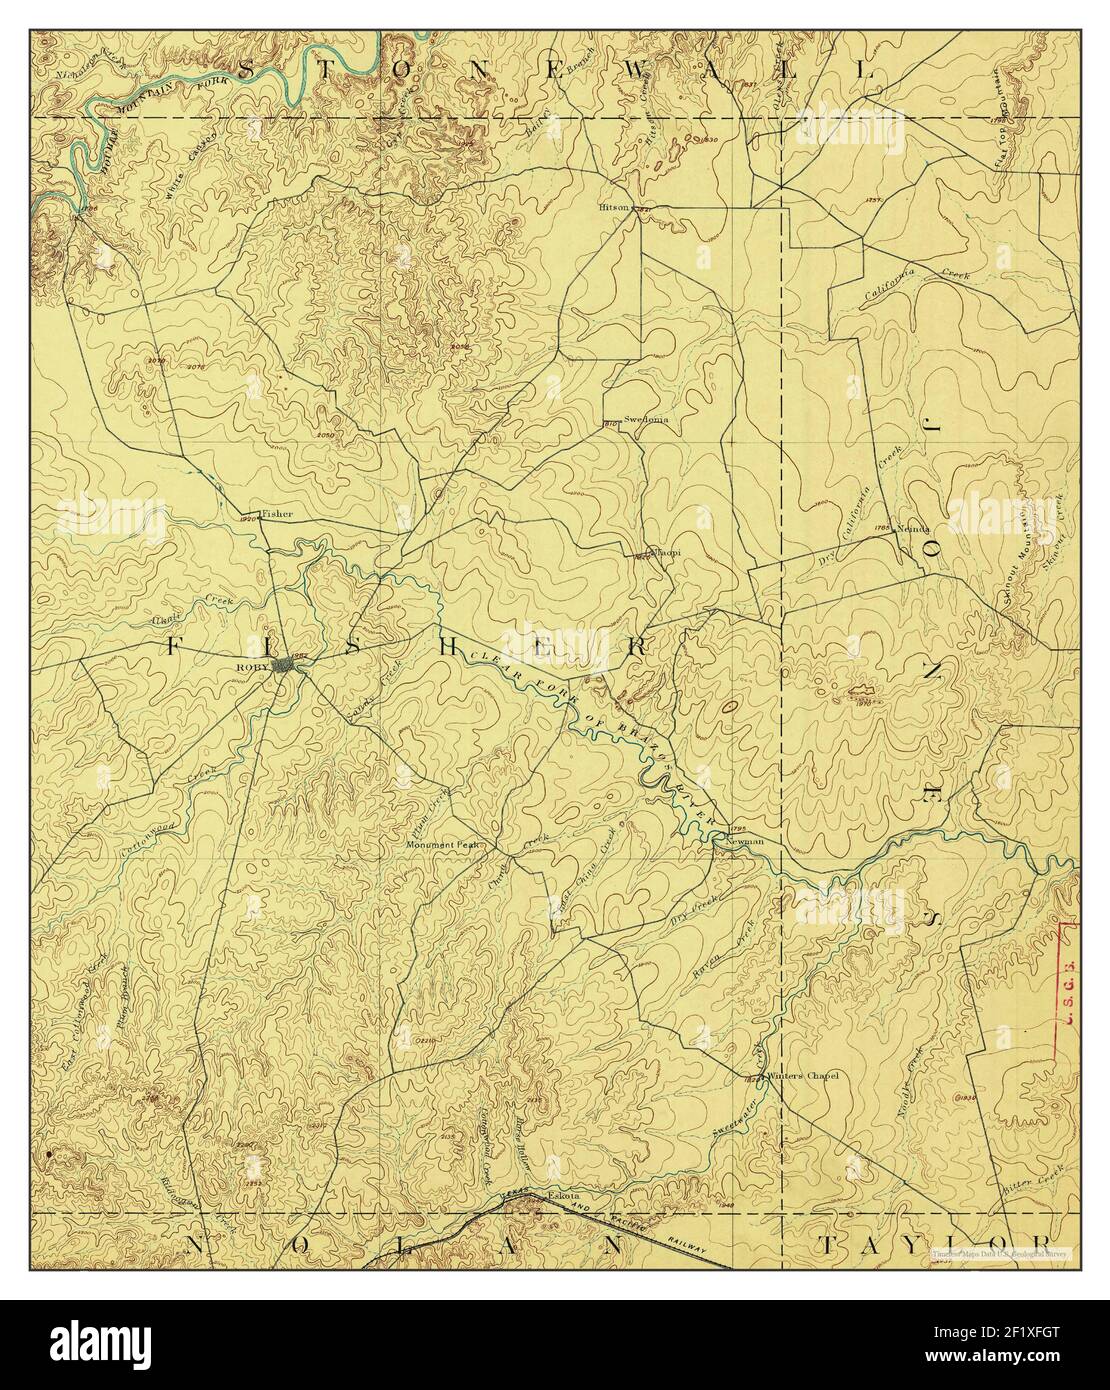 Roby, Texas, map 1893, 1:125000, United States of America by Timeless Maps, data U.S. Geological Survey Stock Photo